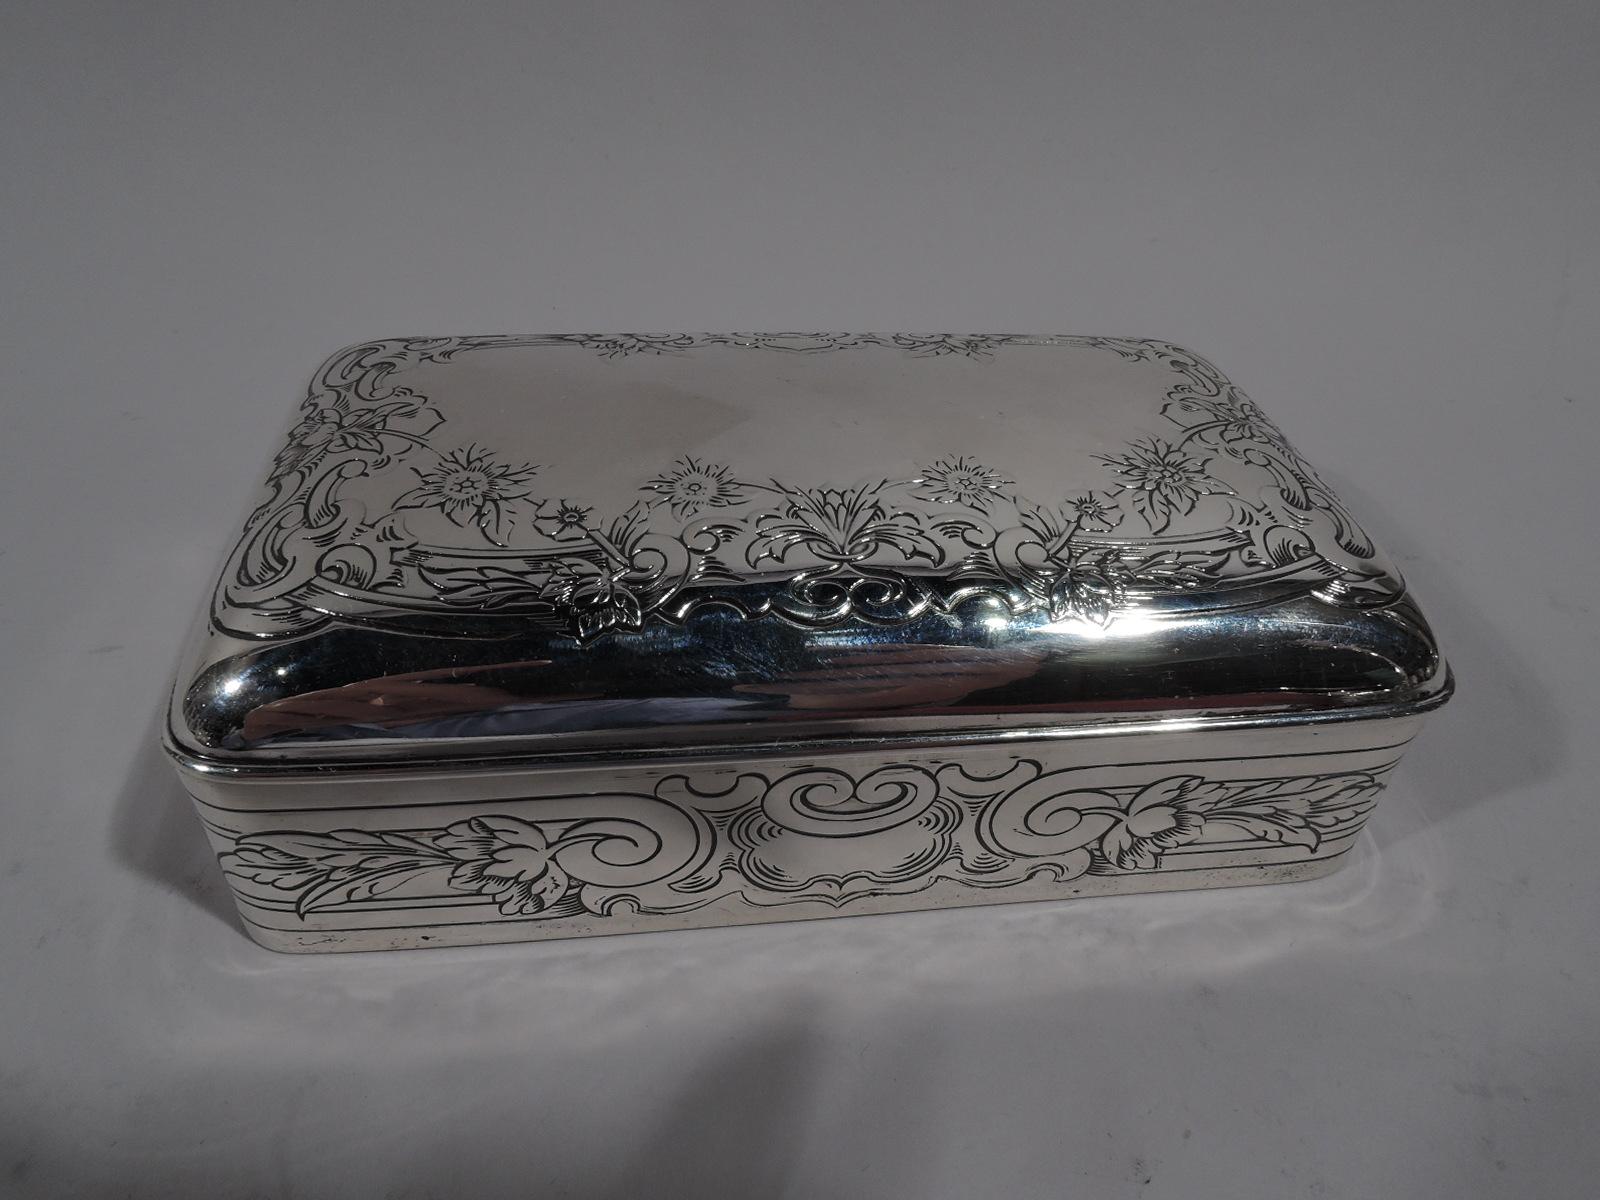 Edwardian Classical sterling silver jewelry box. Made by Gorham in Providence in 1913. Rectangular with straight sides and curved corners. Cover hinged and curved with molded rim. Box has wrapround linear bands terminating at front in volute